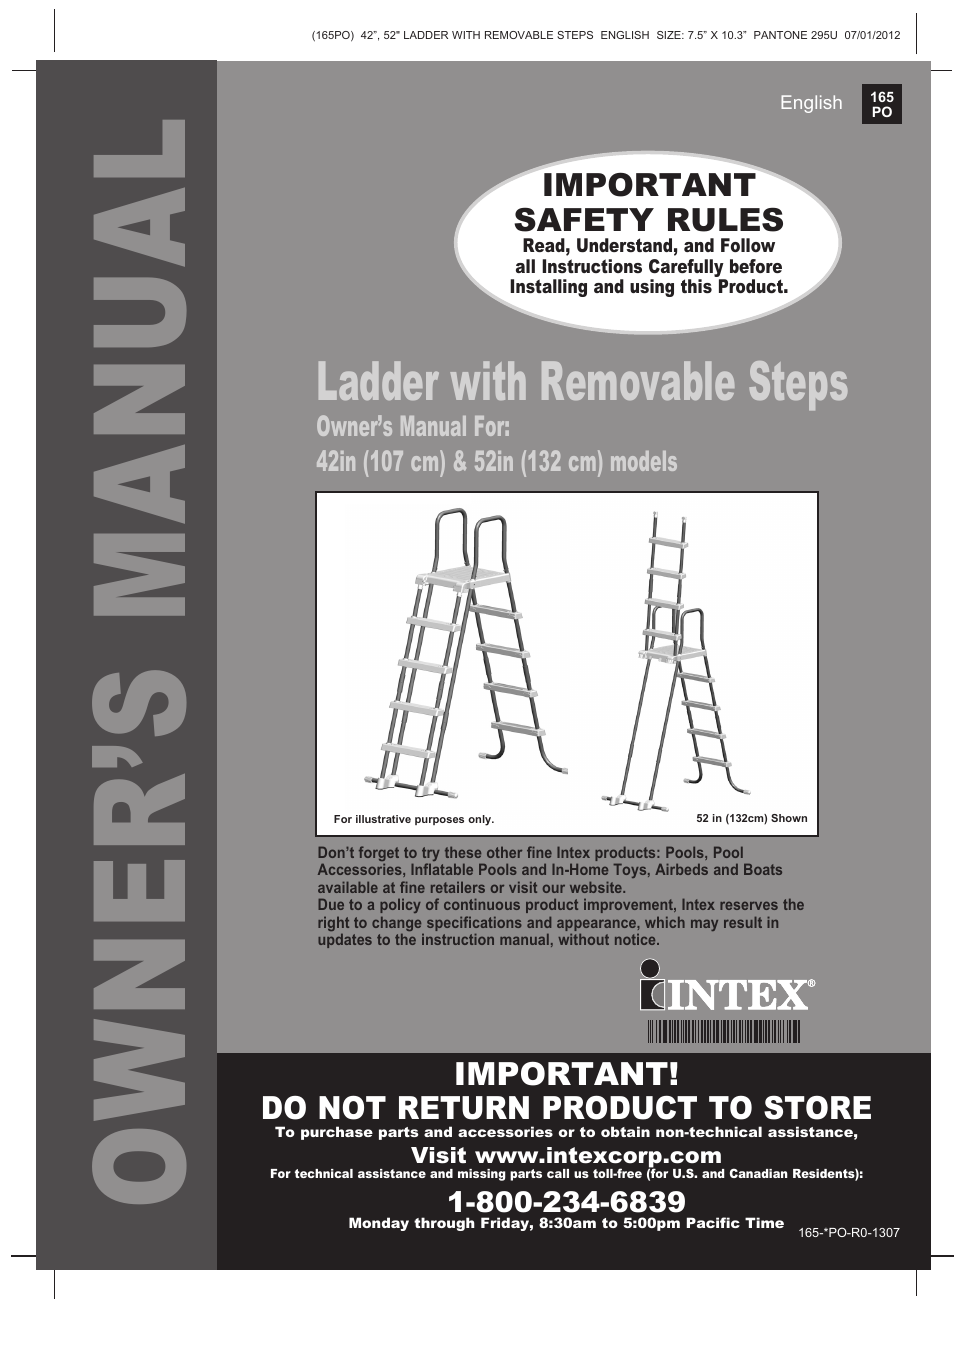 Intex Ladder with Removable Steps For 52in (132 cm) User Manual | 14